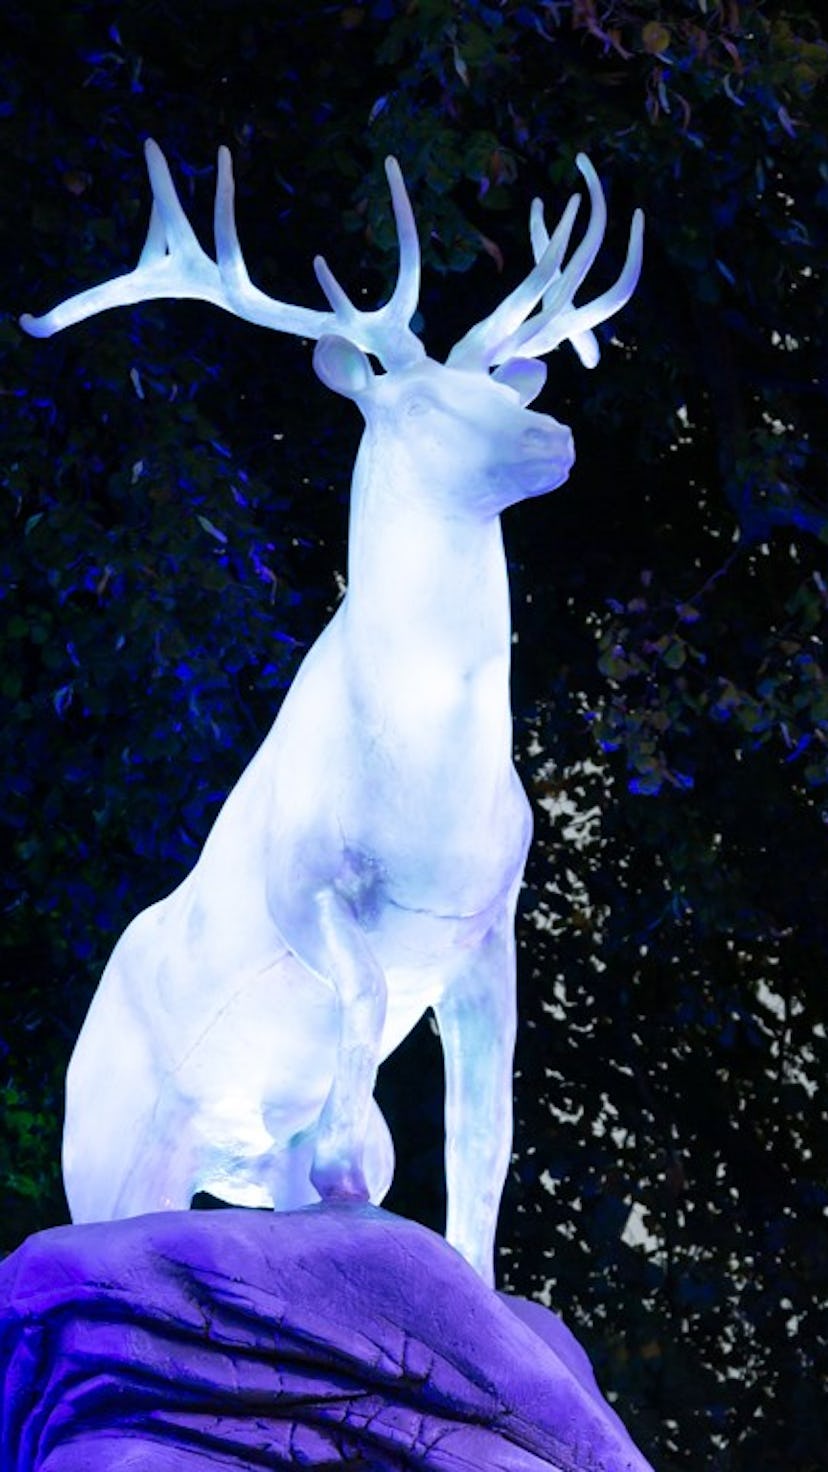 'Harry Potter': A Forbidden Forest Experience promo image of a stag patronus.